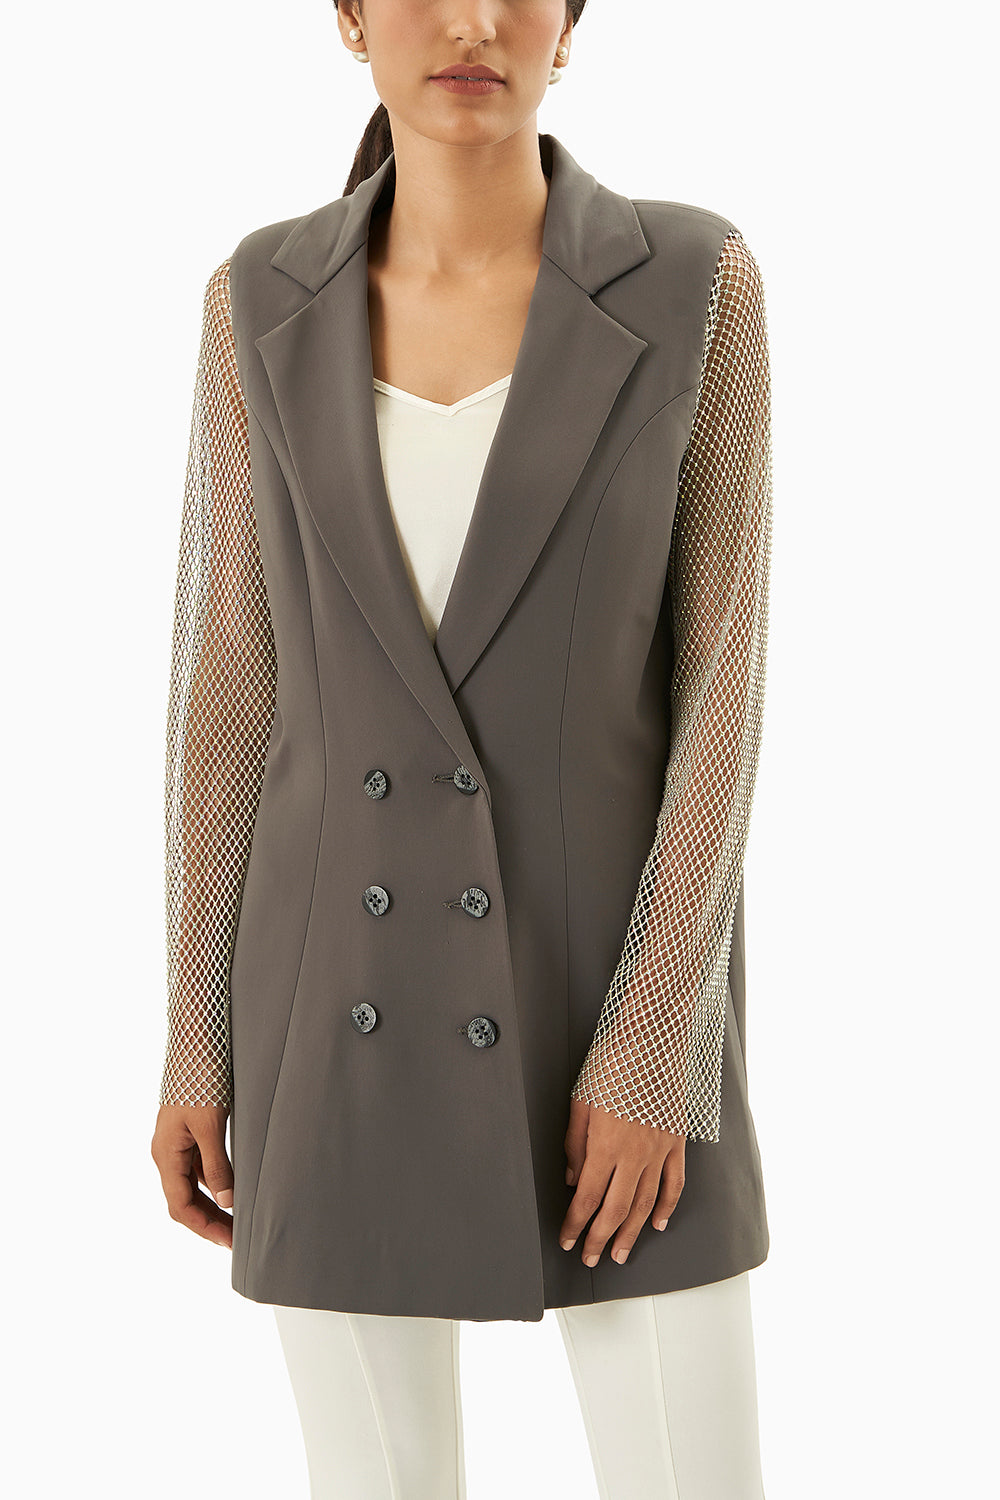 Grey Blazer with Lace Sleeves